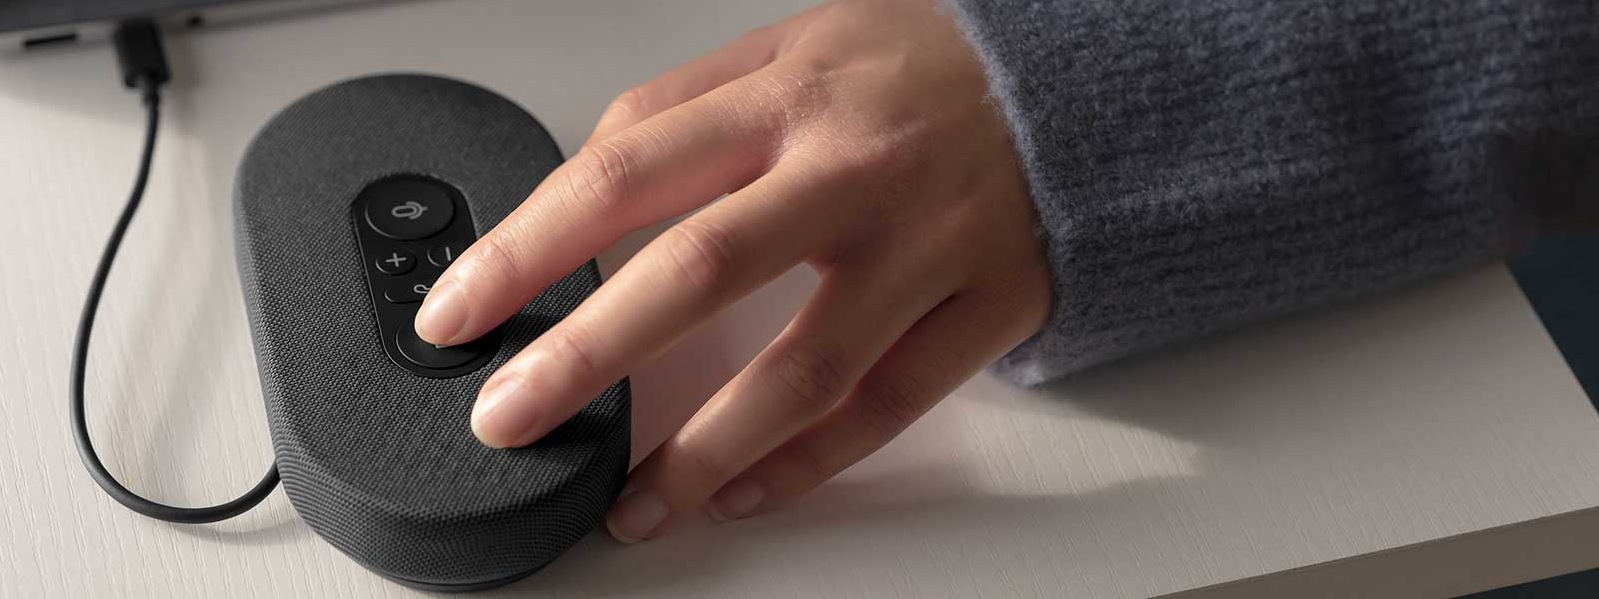 A hand lays on a Microsoft Modern USB-C Speaker that is plugged into a laptop port